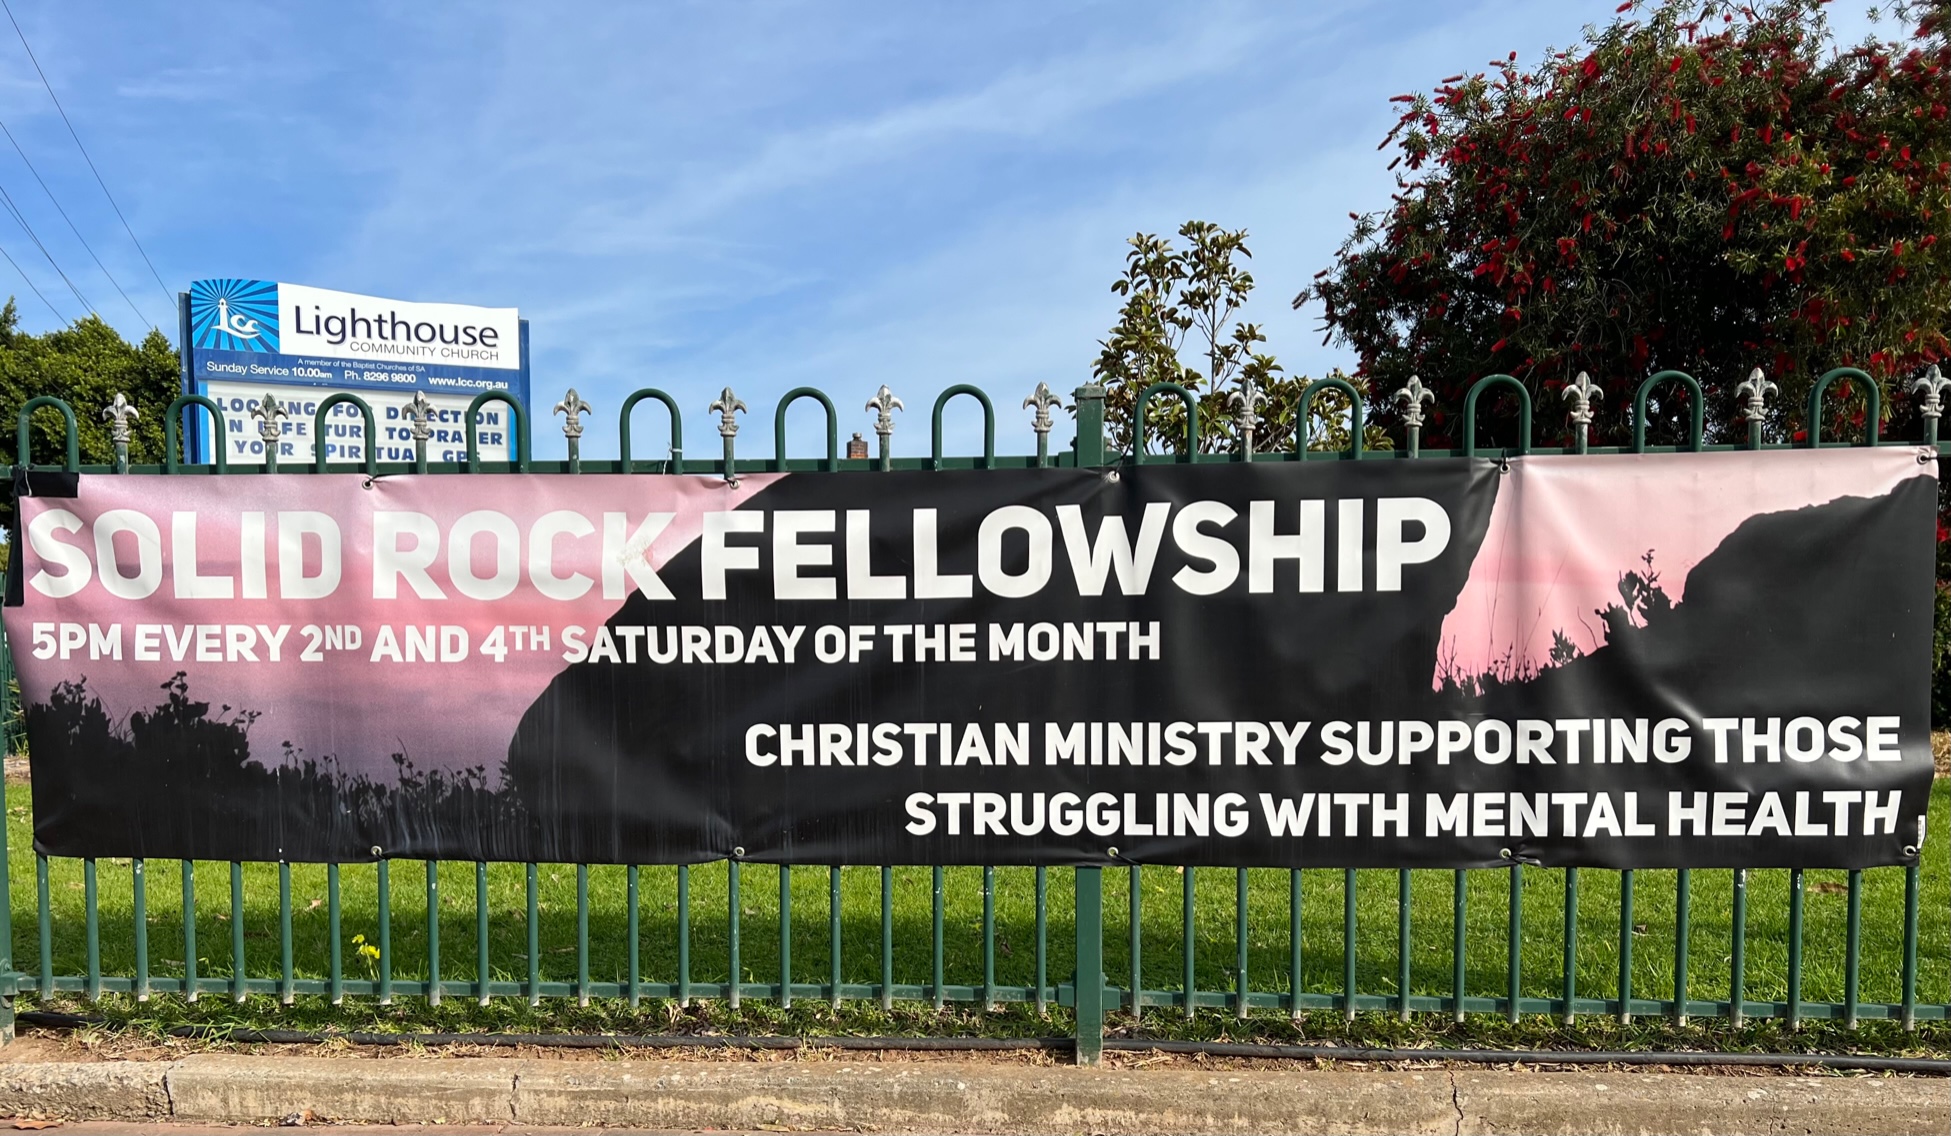 Solid Rock Fellowship – a Christian ministry for those struggling with mental health